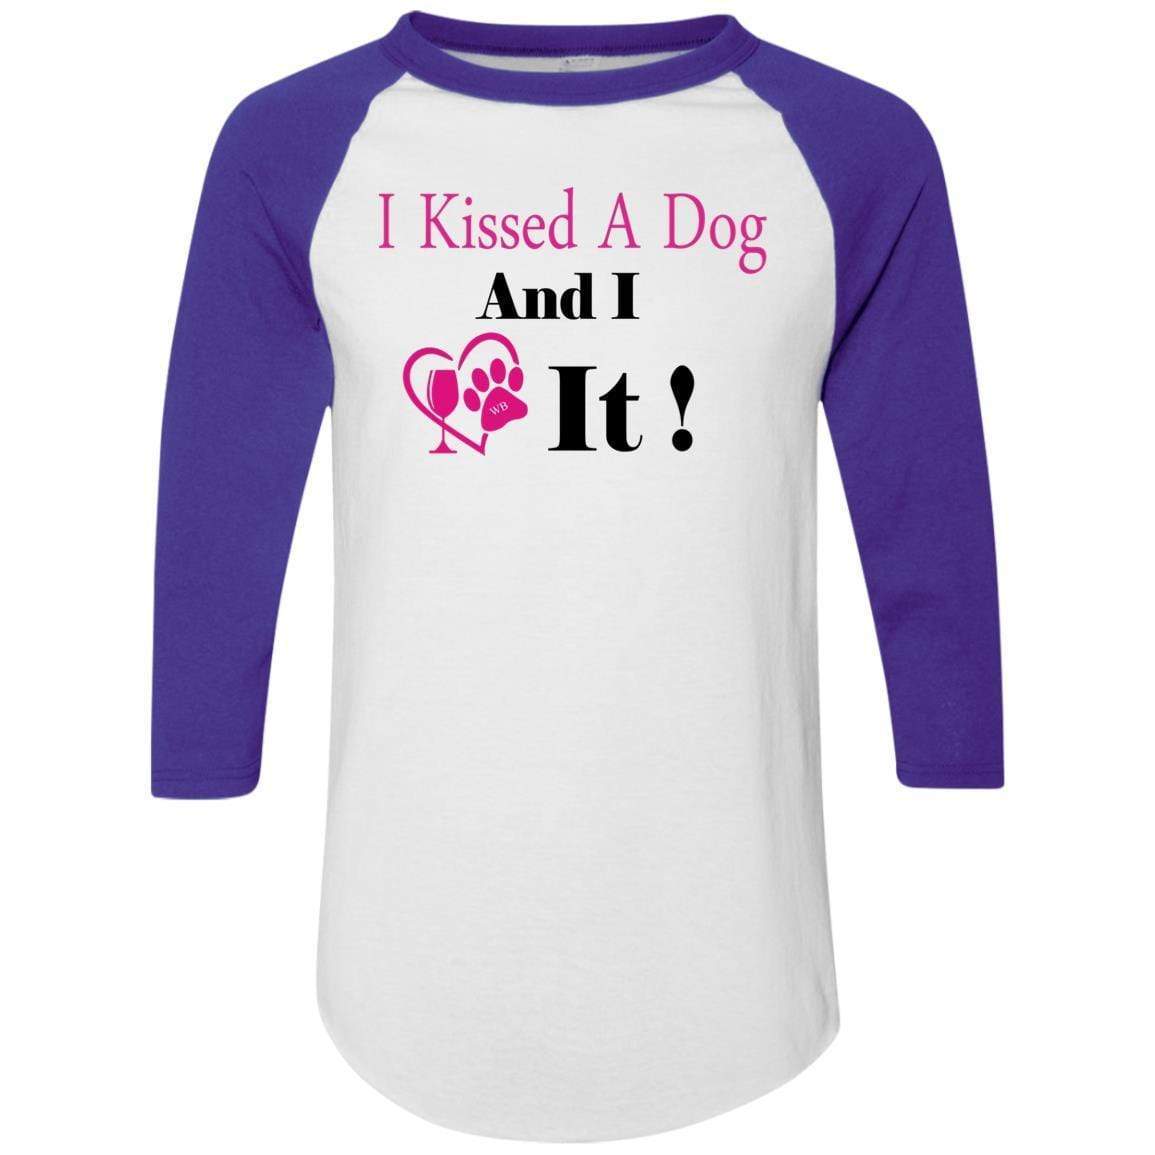 T-Shirts White/Purple / S WineyBitches.co "I Kissed A Dog And I Loved It:" Colorblock Raglan Jersey WineyBitchesCo